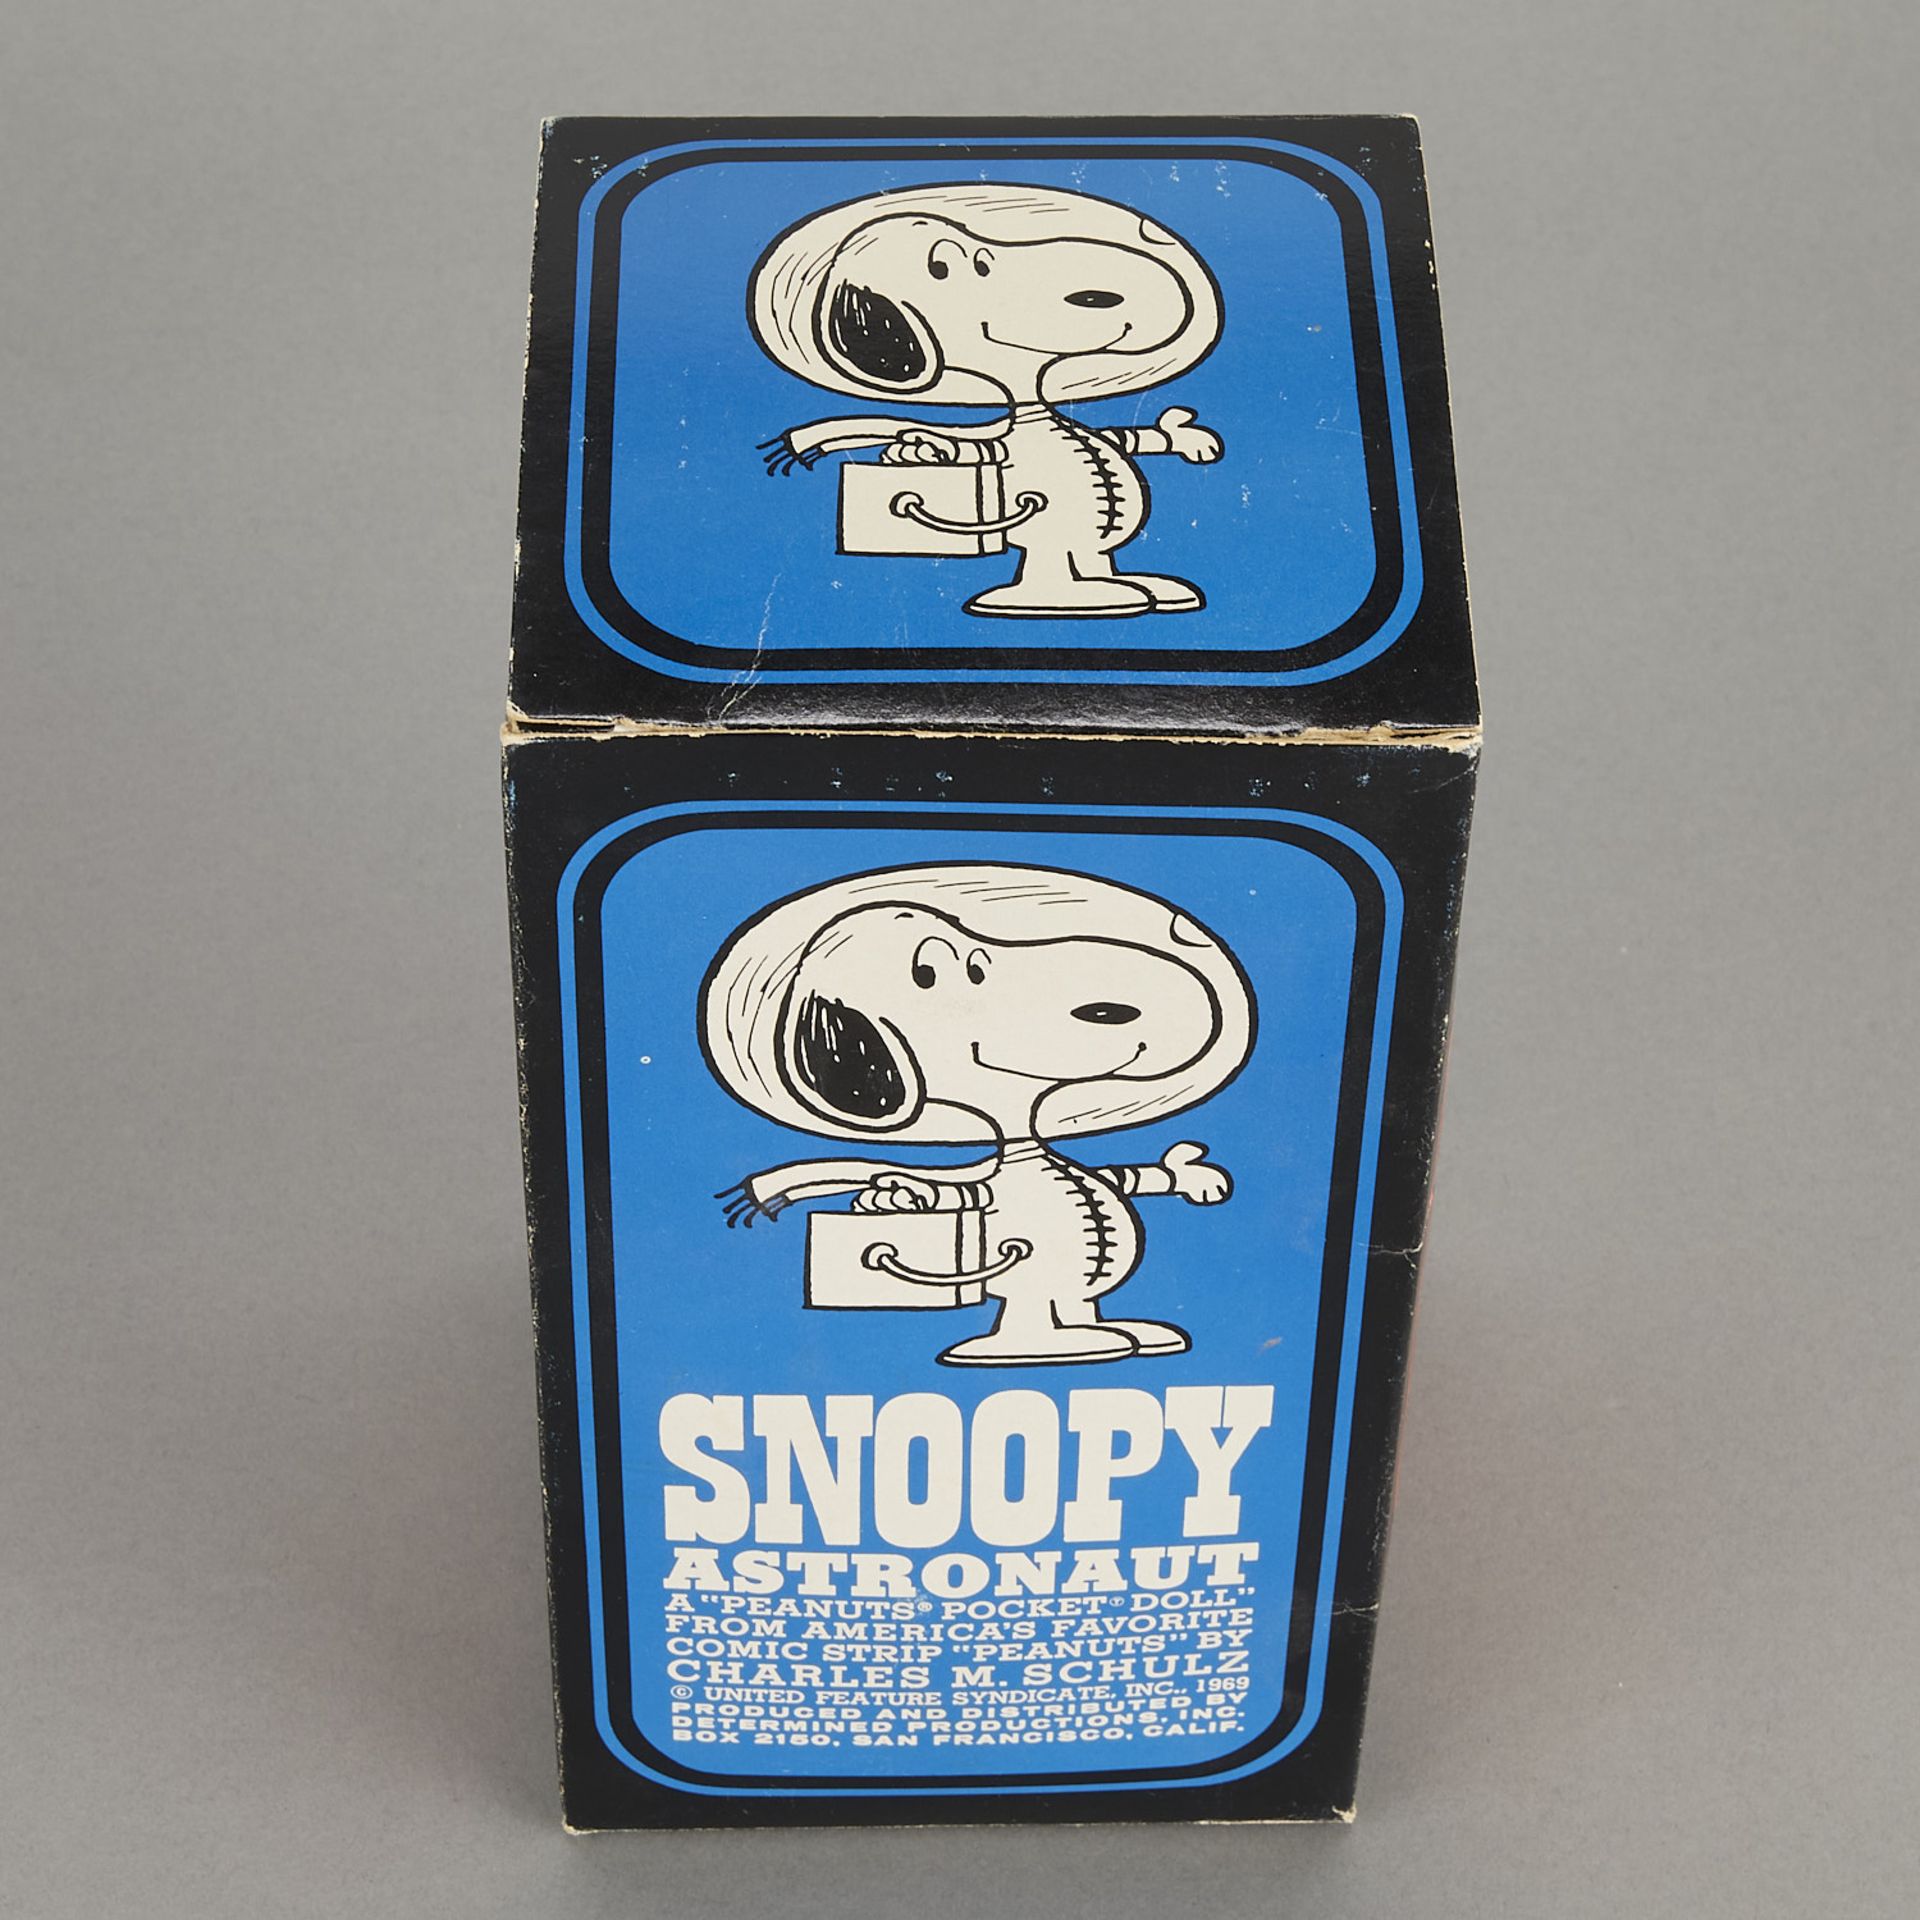 Snoopy Astronaut Pocket Doll with Box - Image 13 of 14